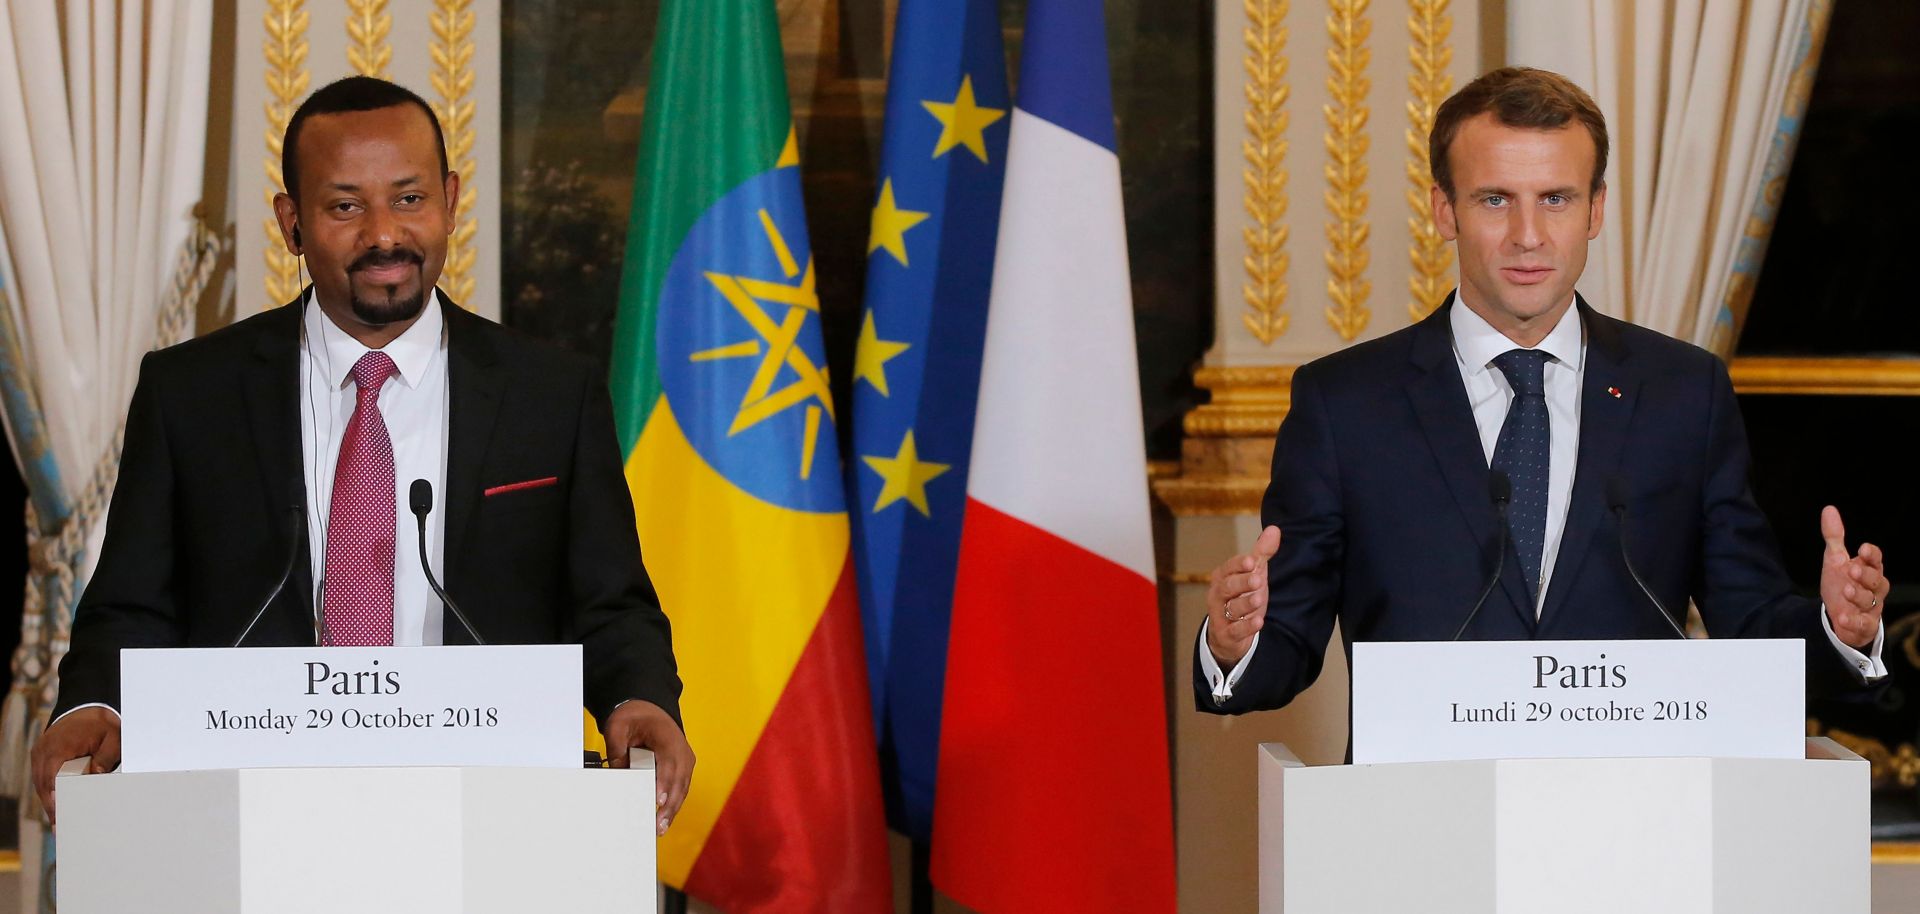 French President Emmanuel Macron gestures during a news conference with Ethiopian Prime Minister Abiy Ahmed in Paris on Oct. 29, 2018.